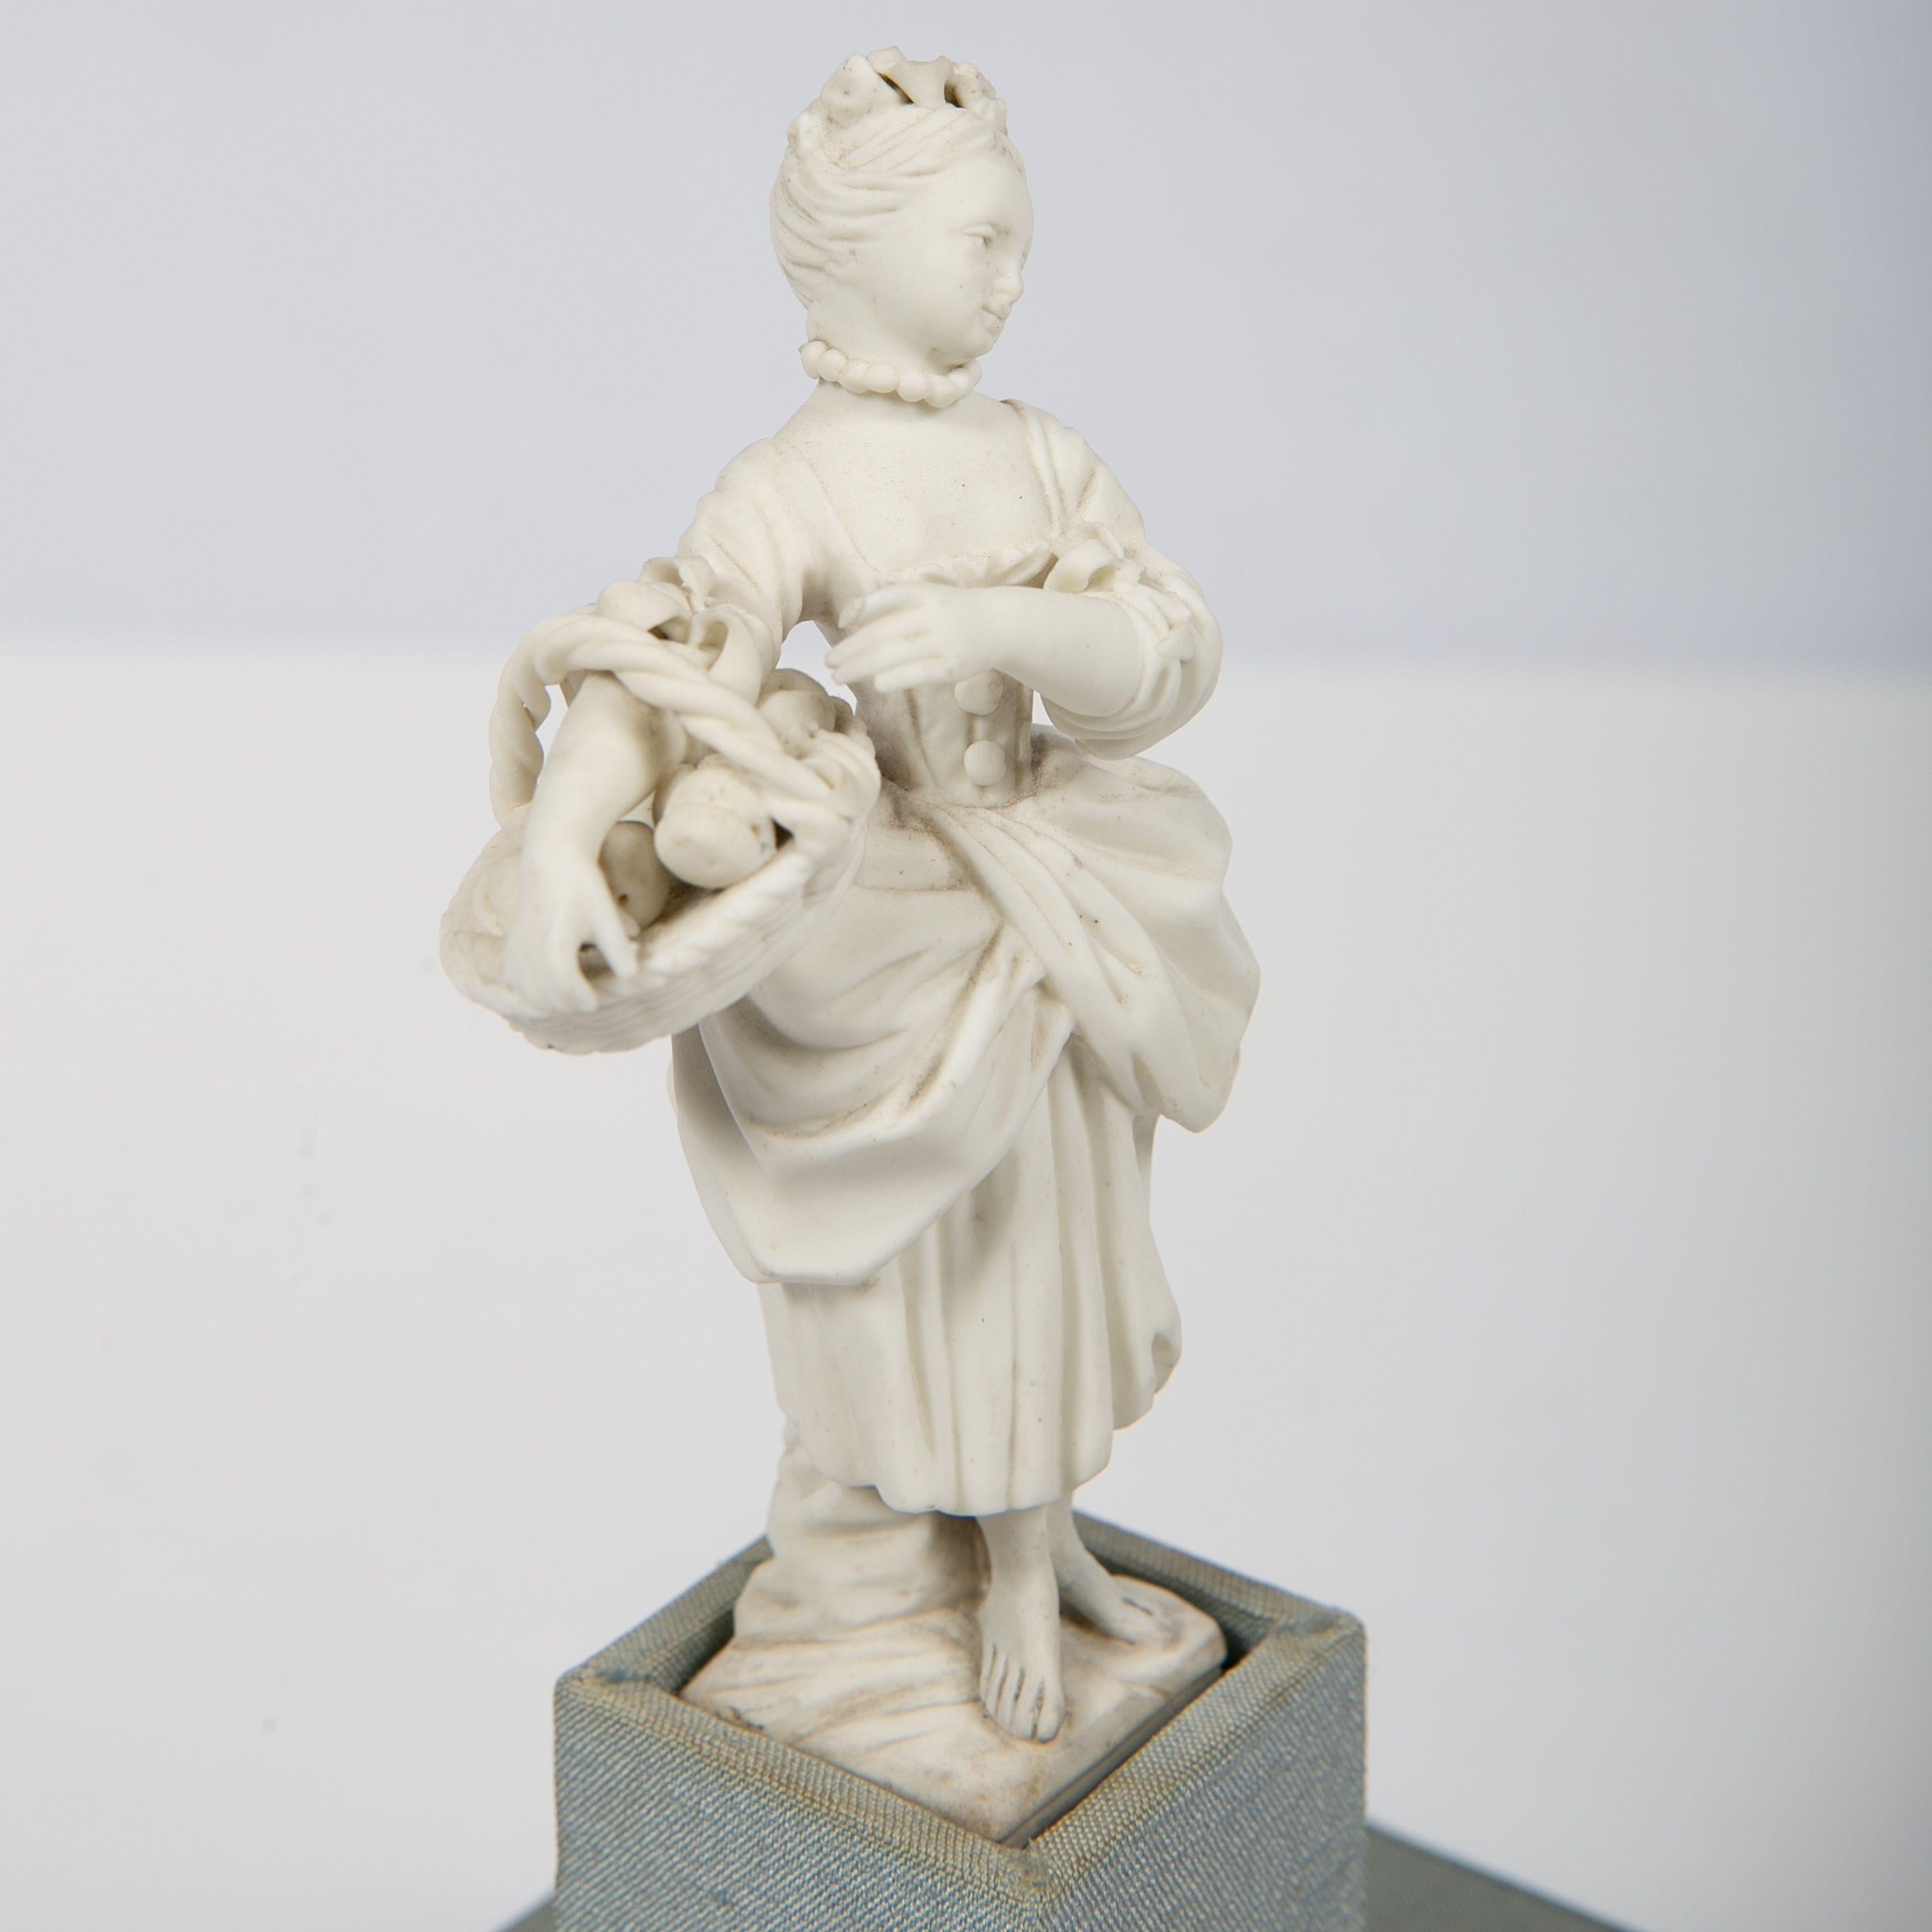 Romantic Small Bisque Figure of Girl Made by Mennecy in 18th Century France